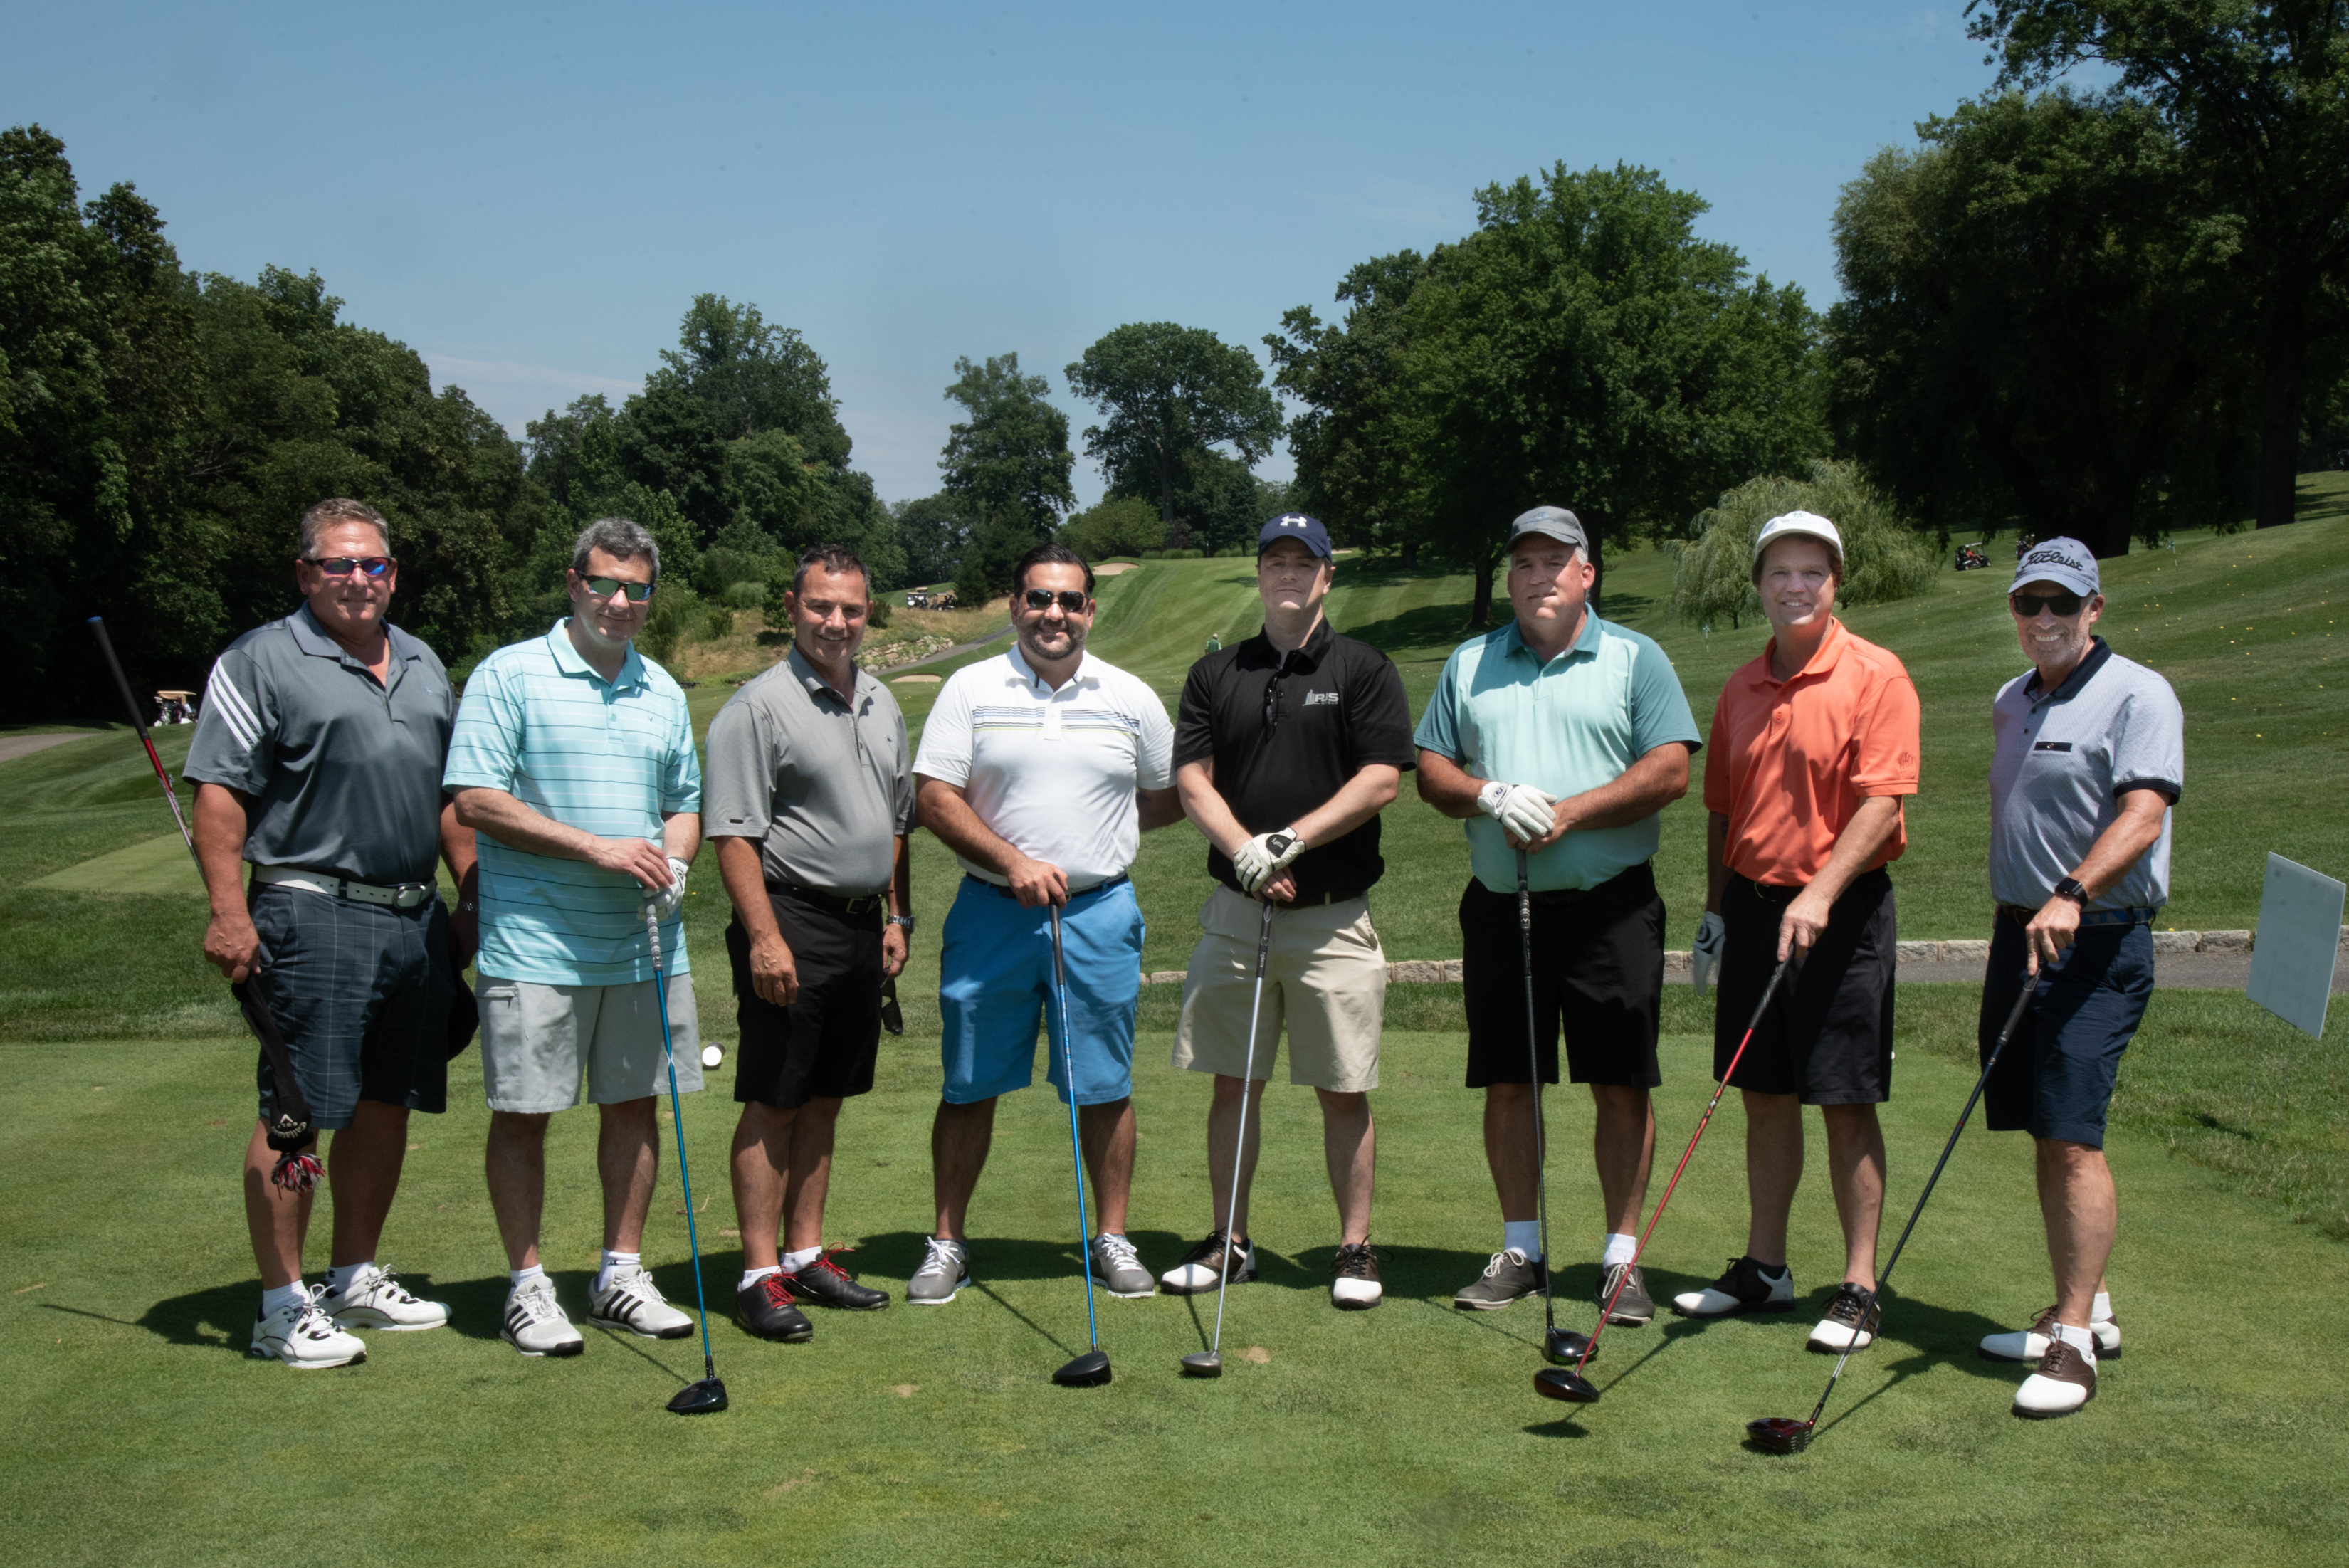 Construction Industry Golf Tournament - Golfers on the green